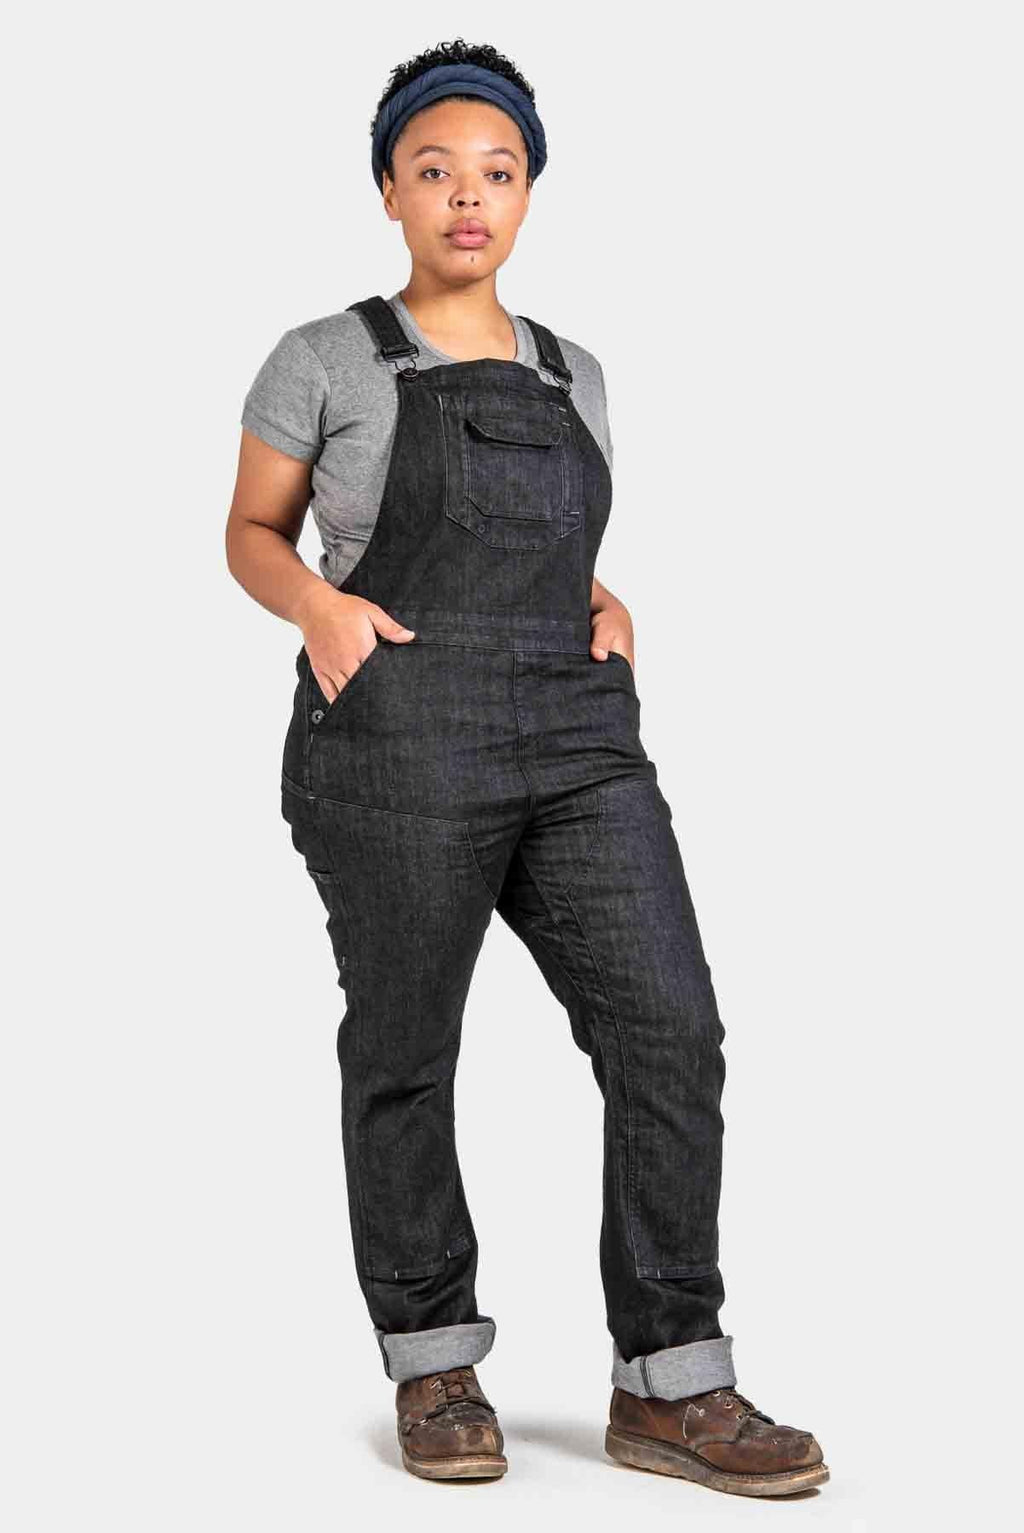 Freshley Overalls For Women in Heathered Black Denim Work Pants Dovetail Workwear